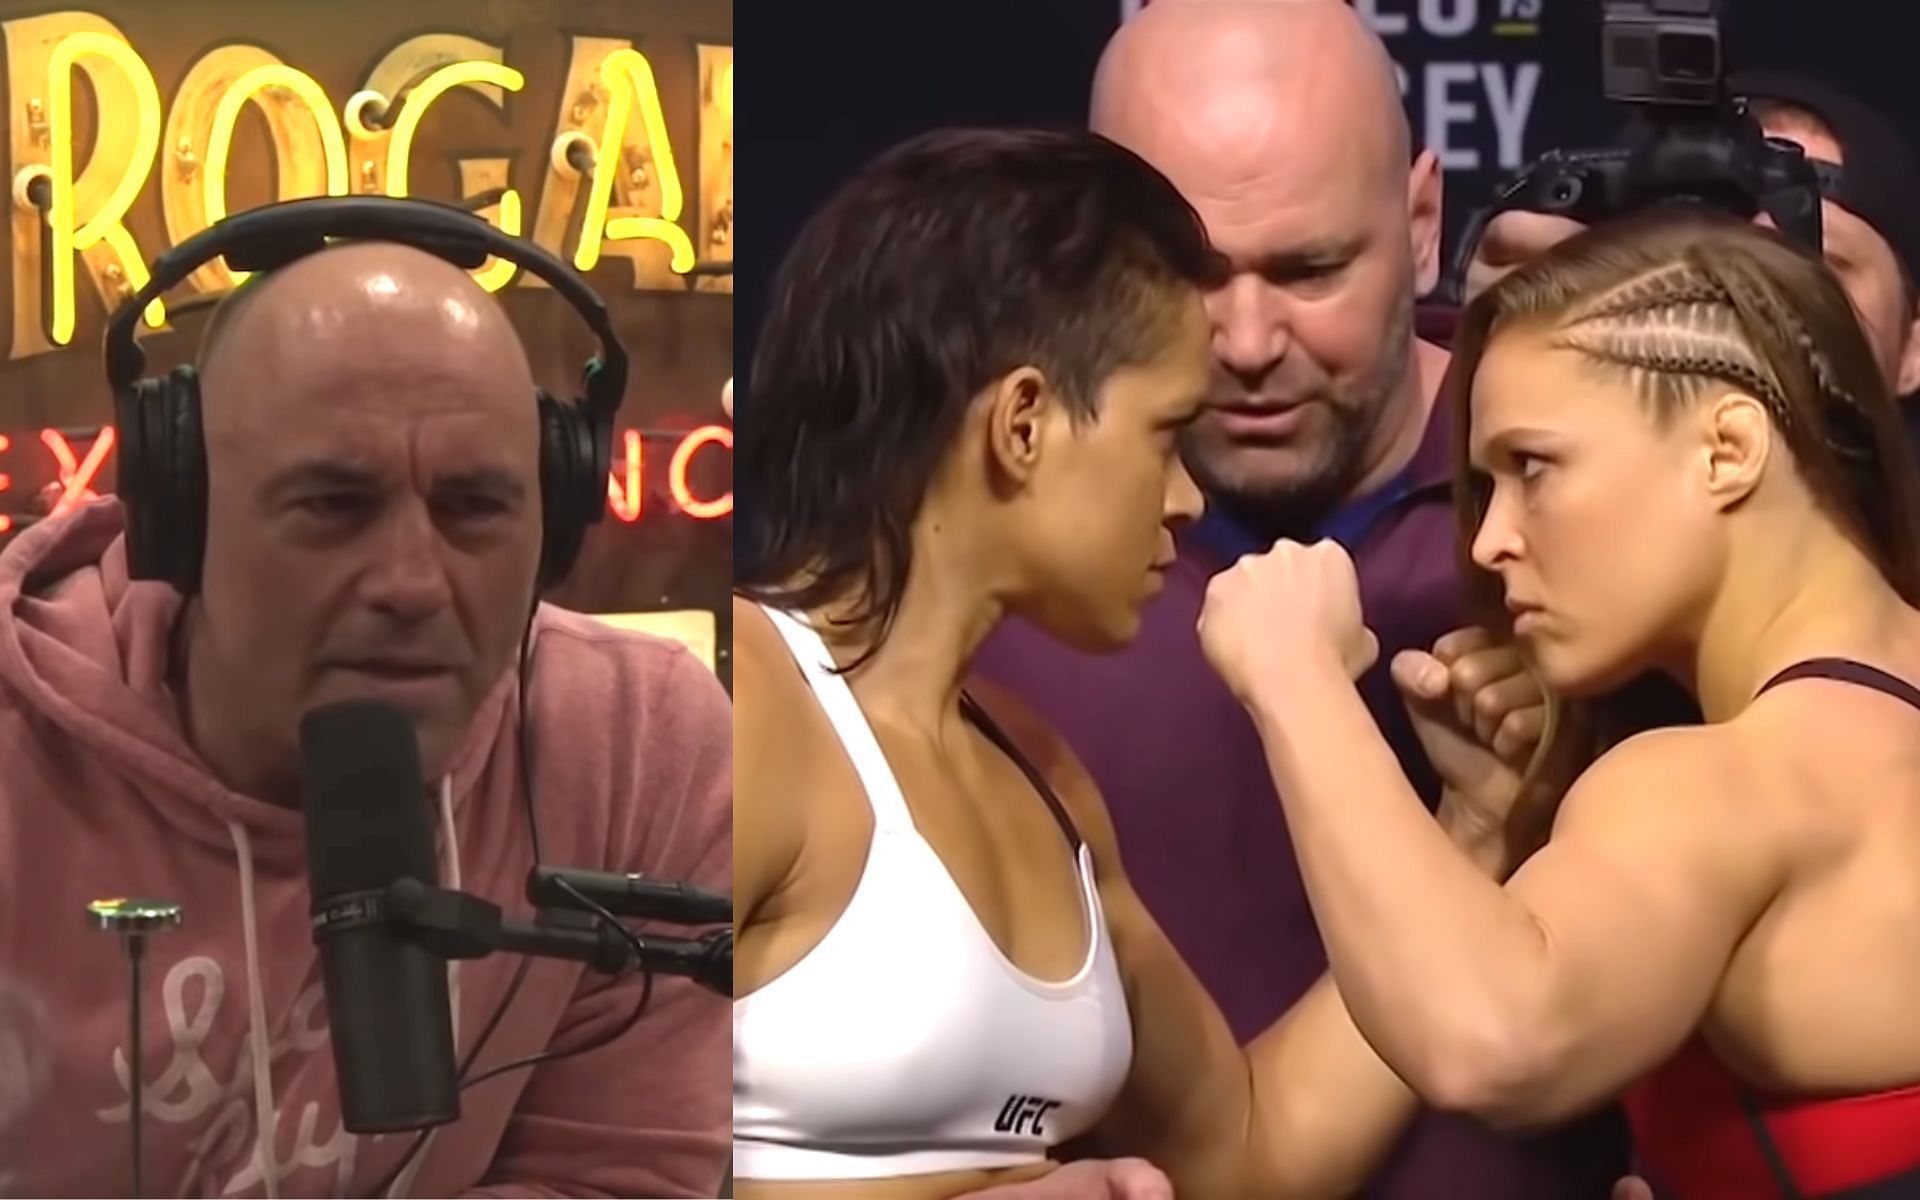 Joe Rogan (left), Amanda Nunes and Ronda Rousey face-off (right) [Images courtesy: JRE Clips and UFC ON FOX via YouTube]